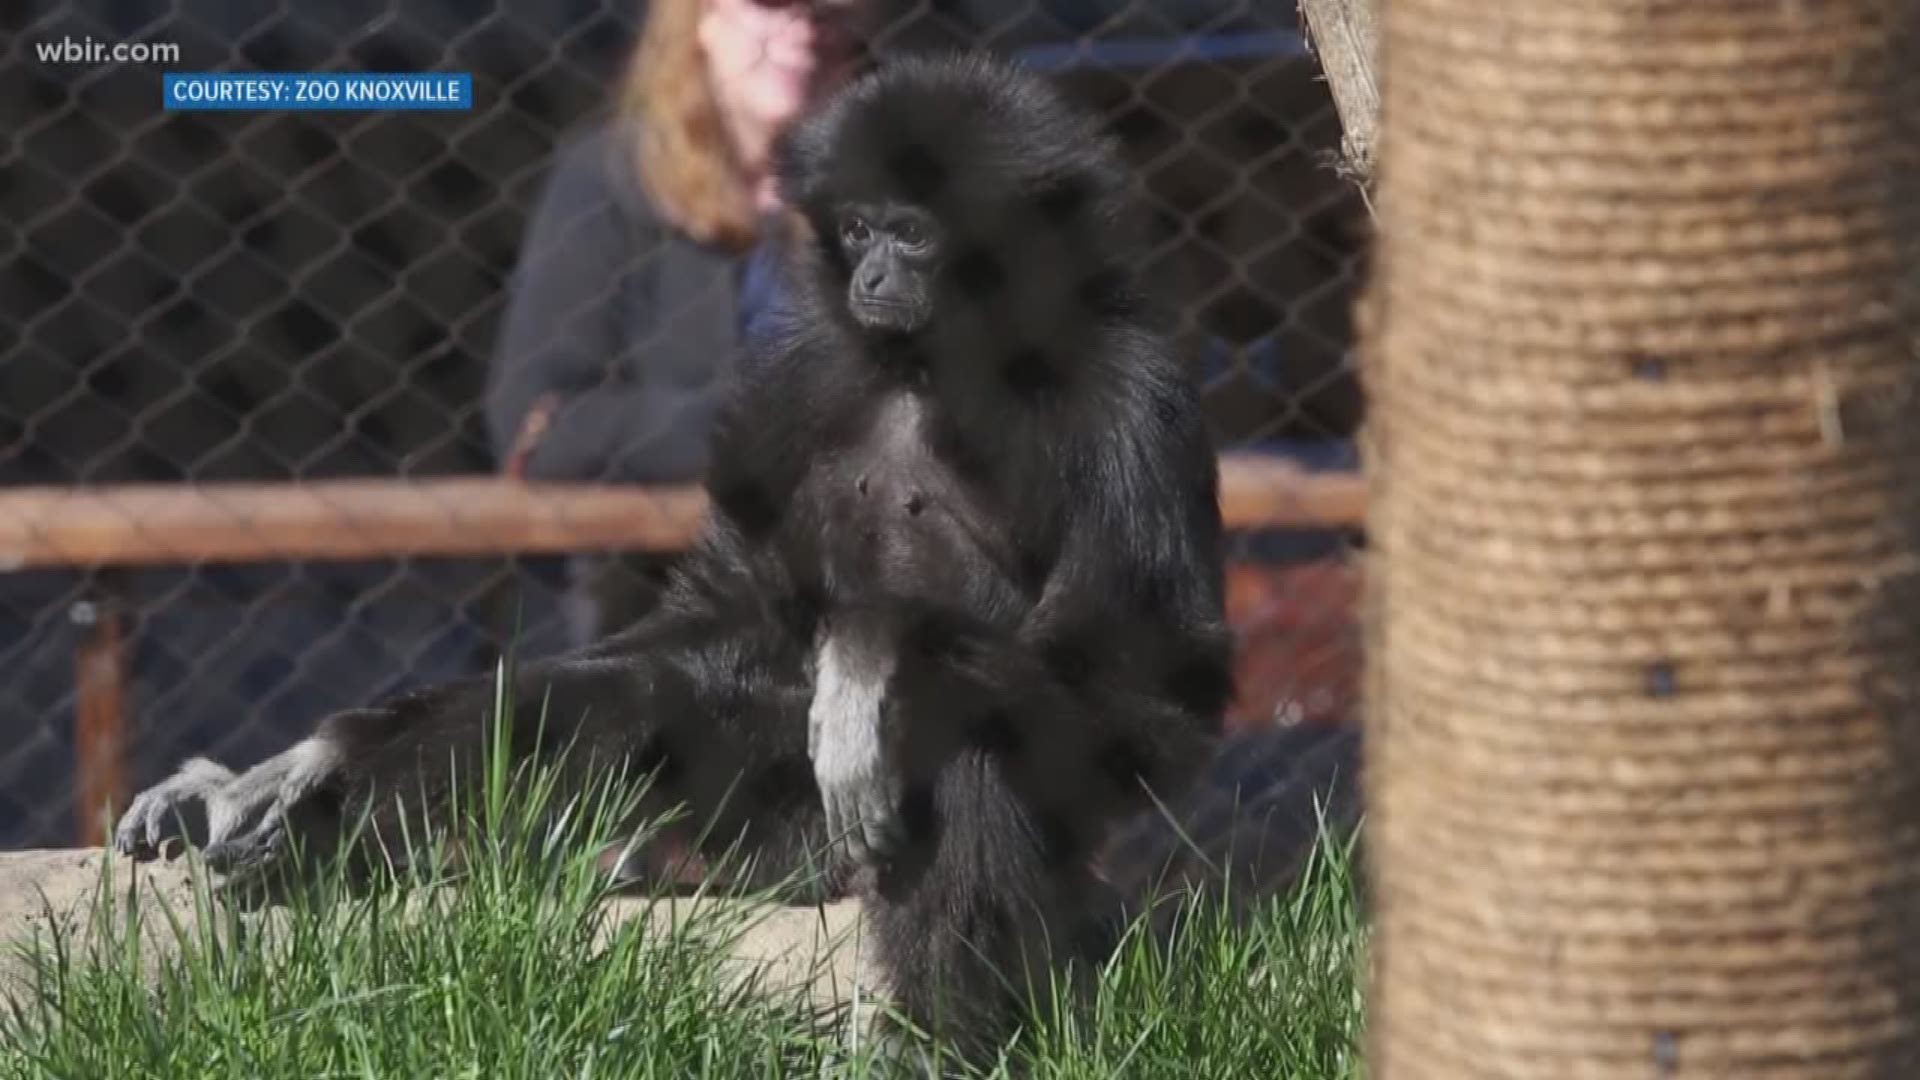 April 18, 2018: Zoo Knoxville is mourning the loss of one of its newest residents, a gibbon named Naomi.